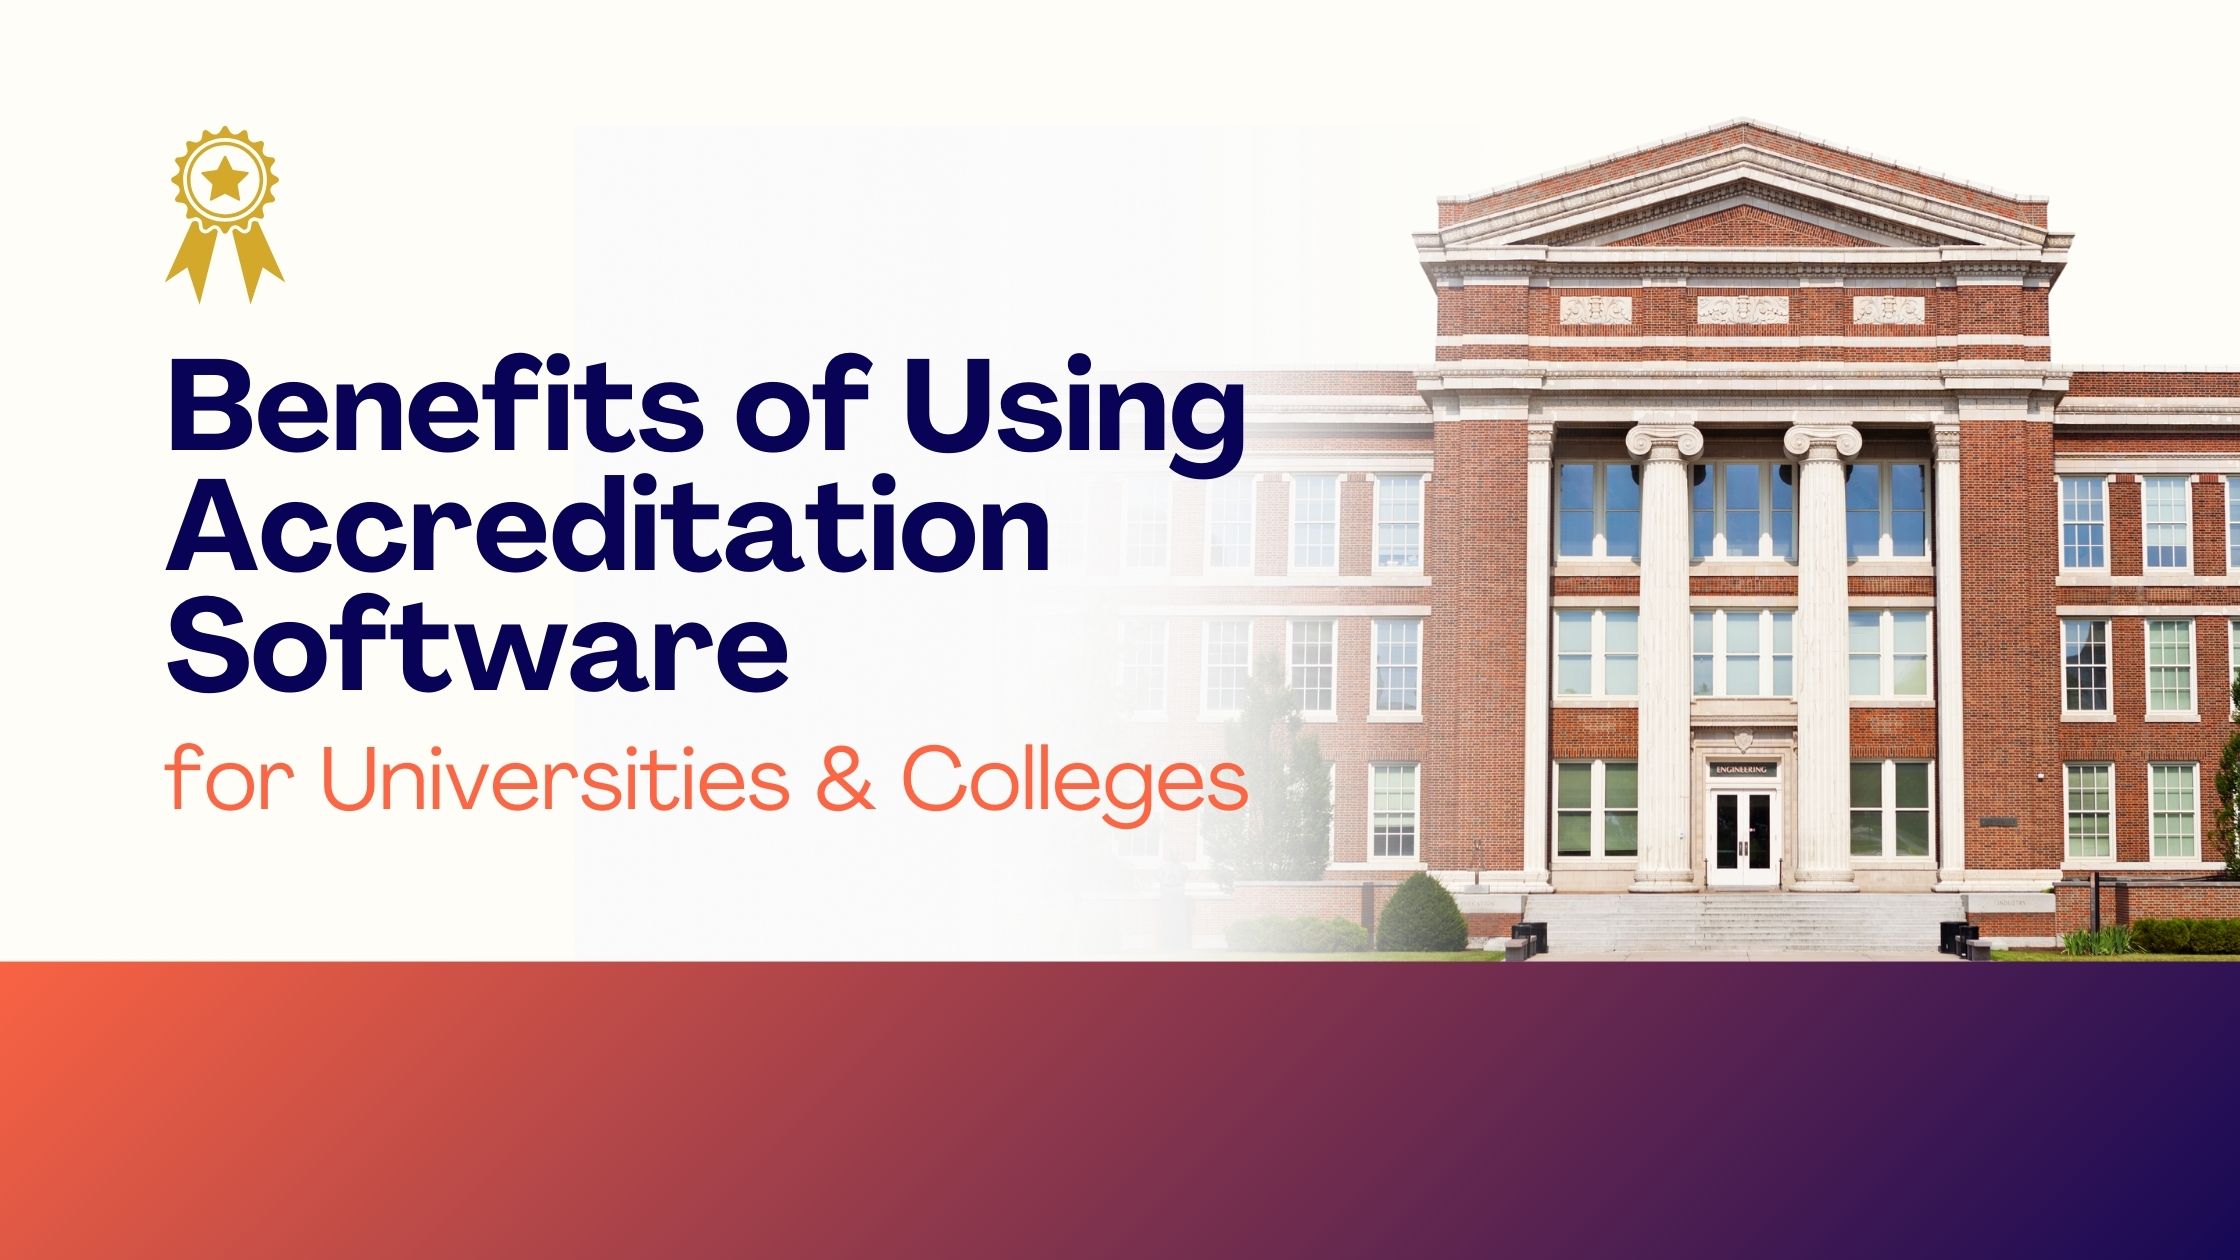 Benefits of Using Accreditation Software for universities and colleges